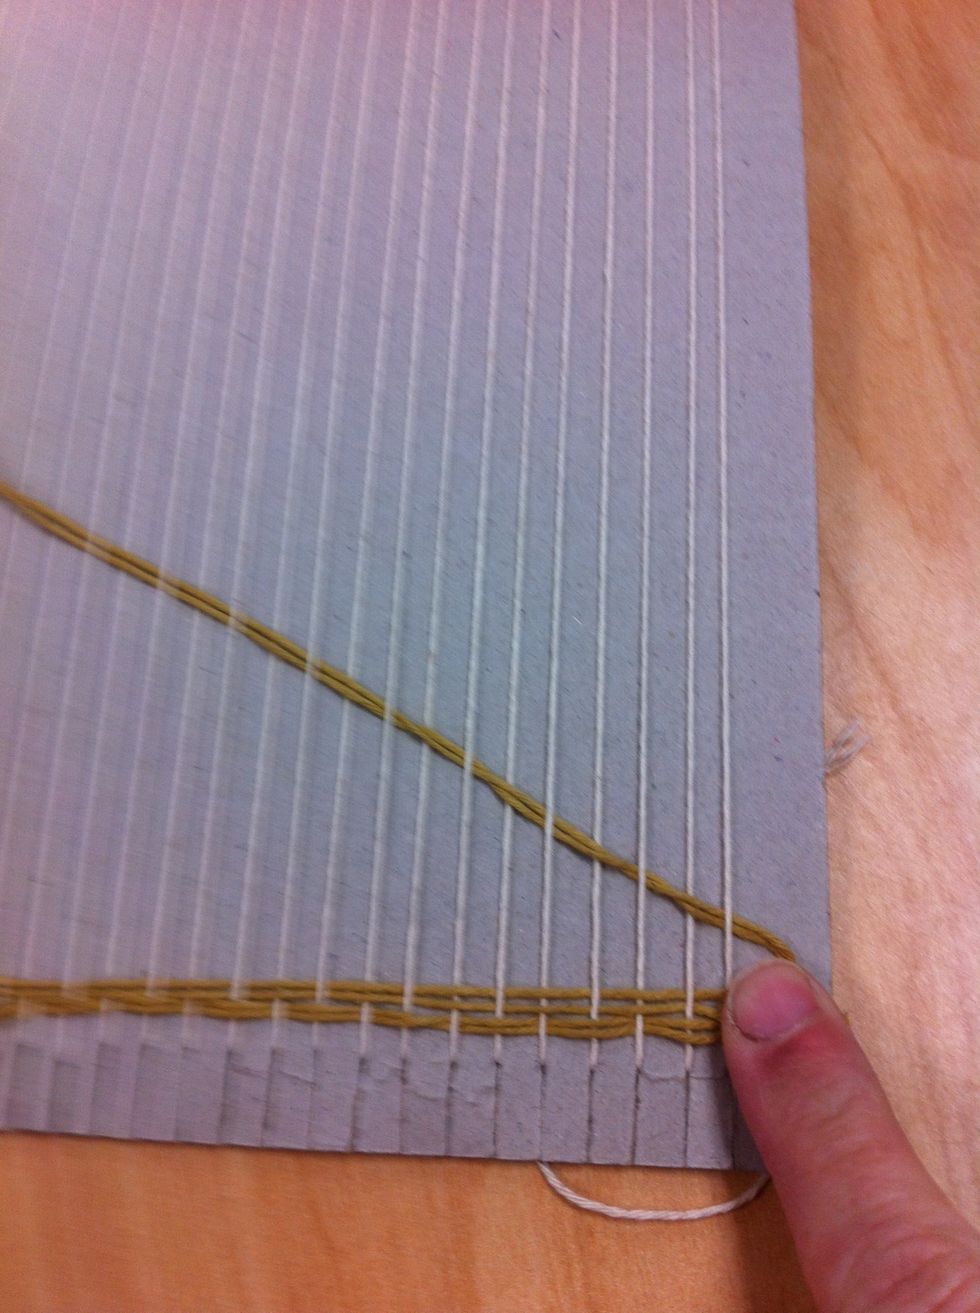 How to begin a basic cardboard loom weaving project - B+C Guides